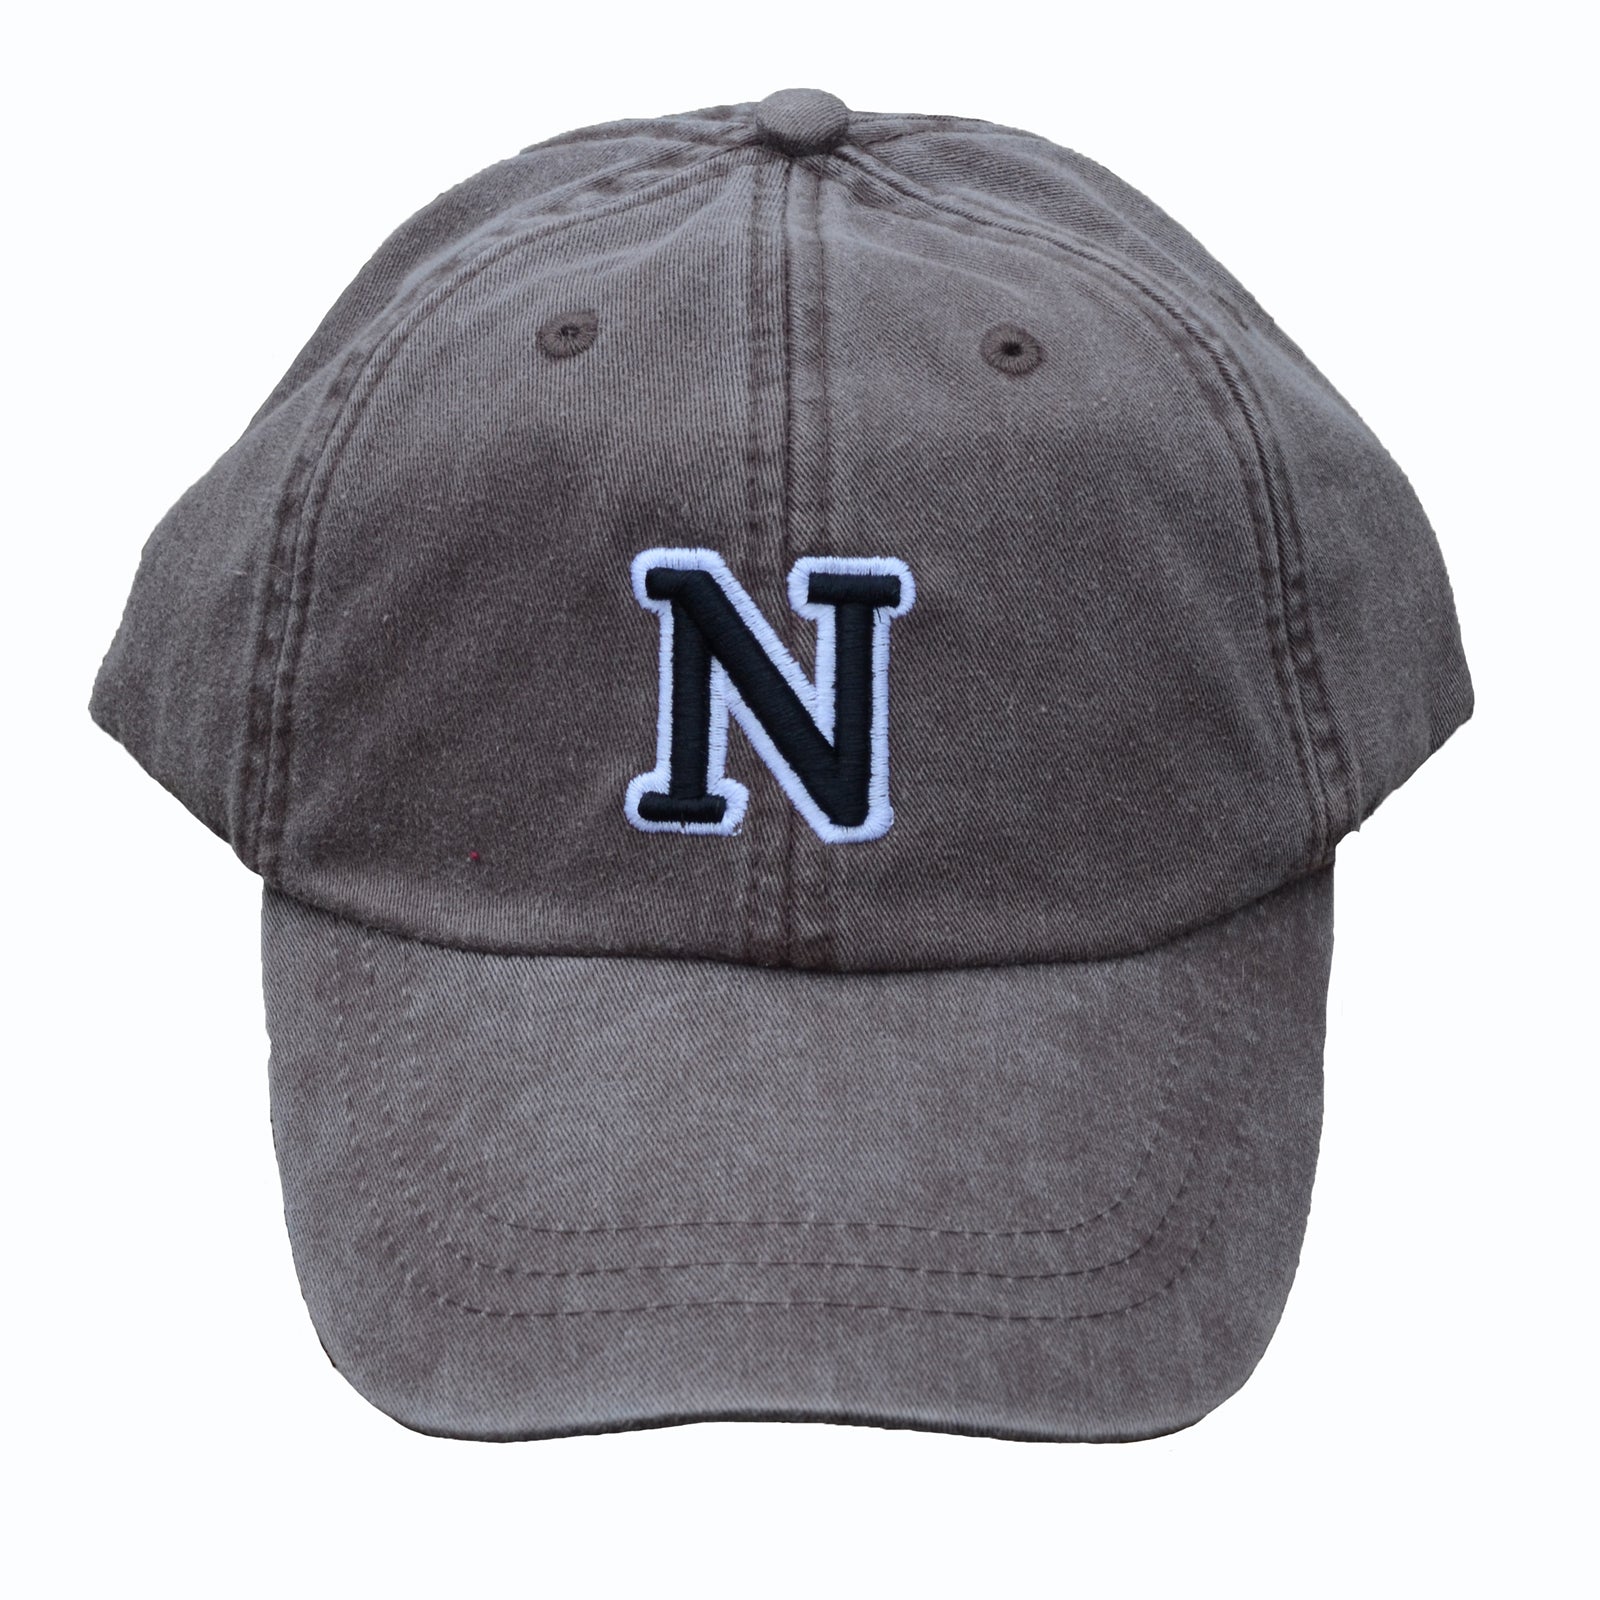 N (for newf), embroidered cap - charcoal & black/white